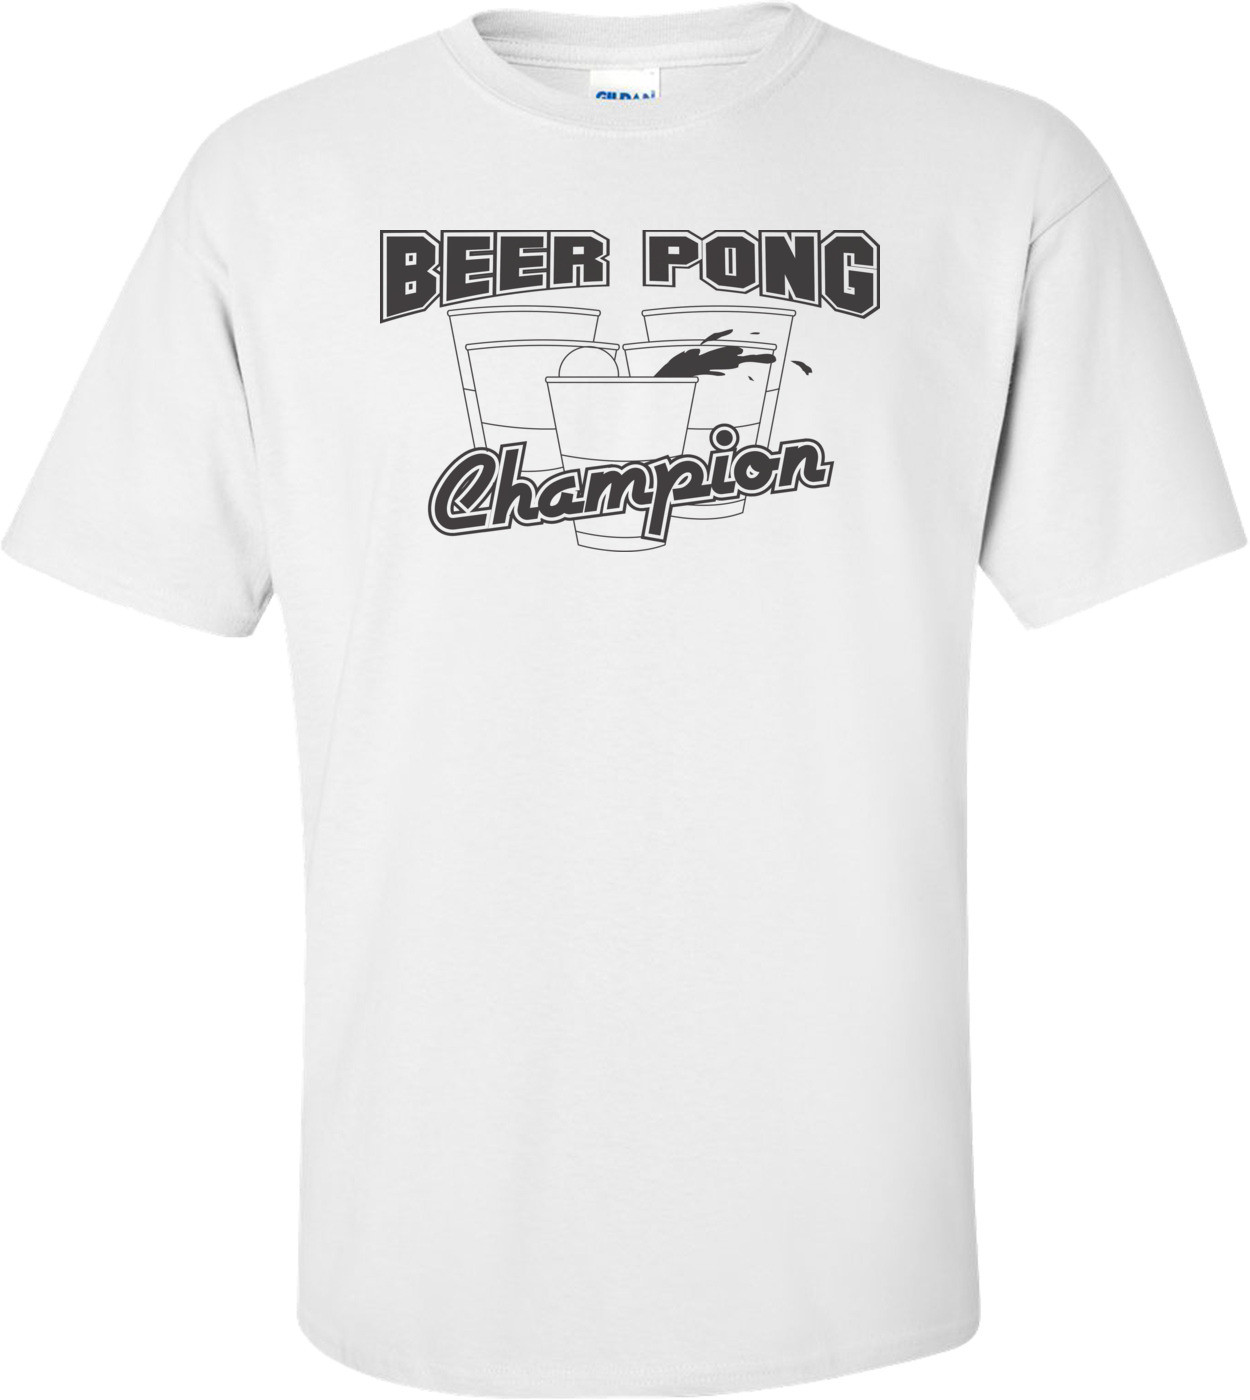 Beer Pong Champ